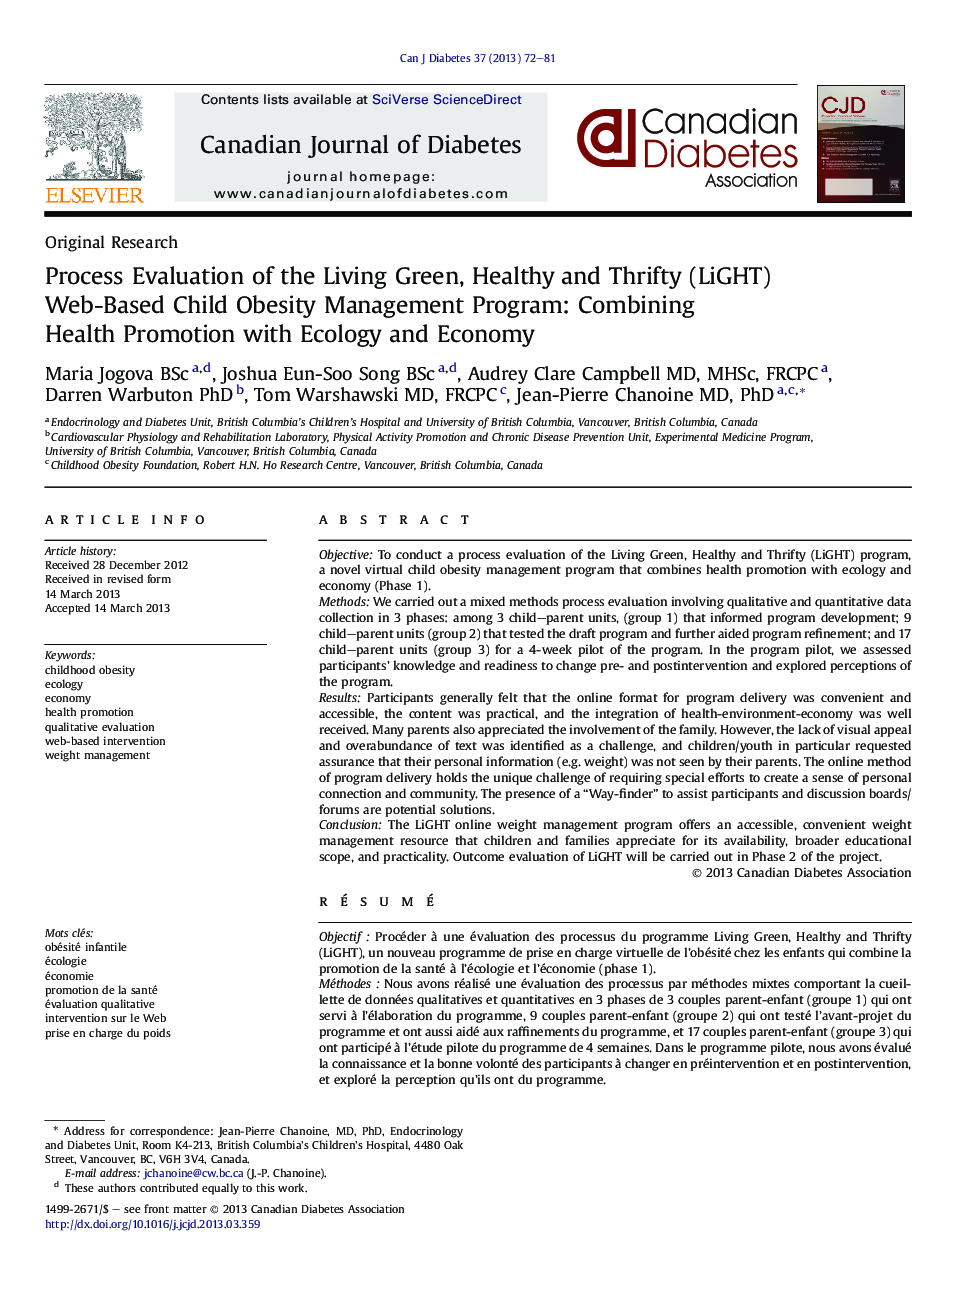 Process Evaluation of the Living Green, Healthy and Thrifty (LiGHT) Web-Based Child Obesity Management Program: Combining Health Promotion with Ecology and Economy